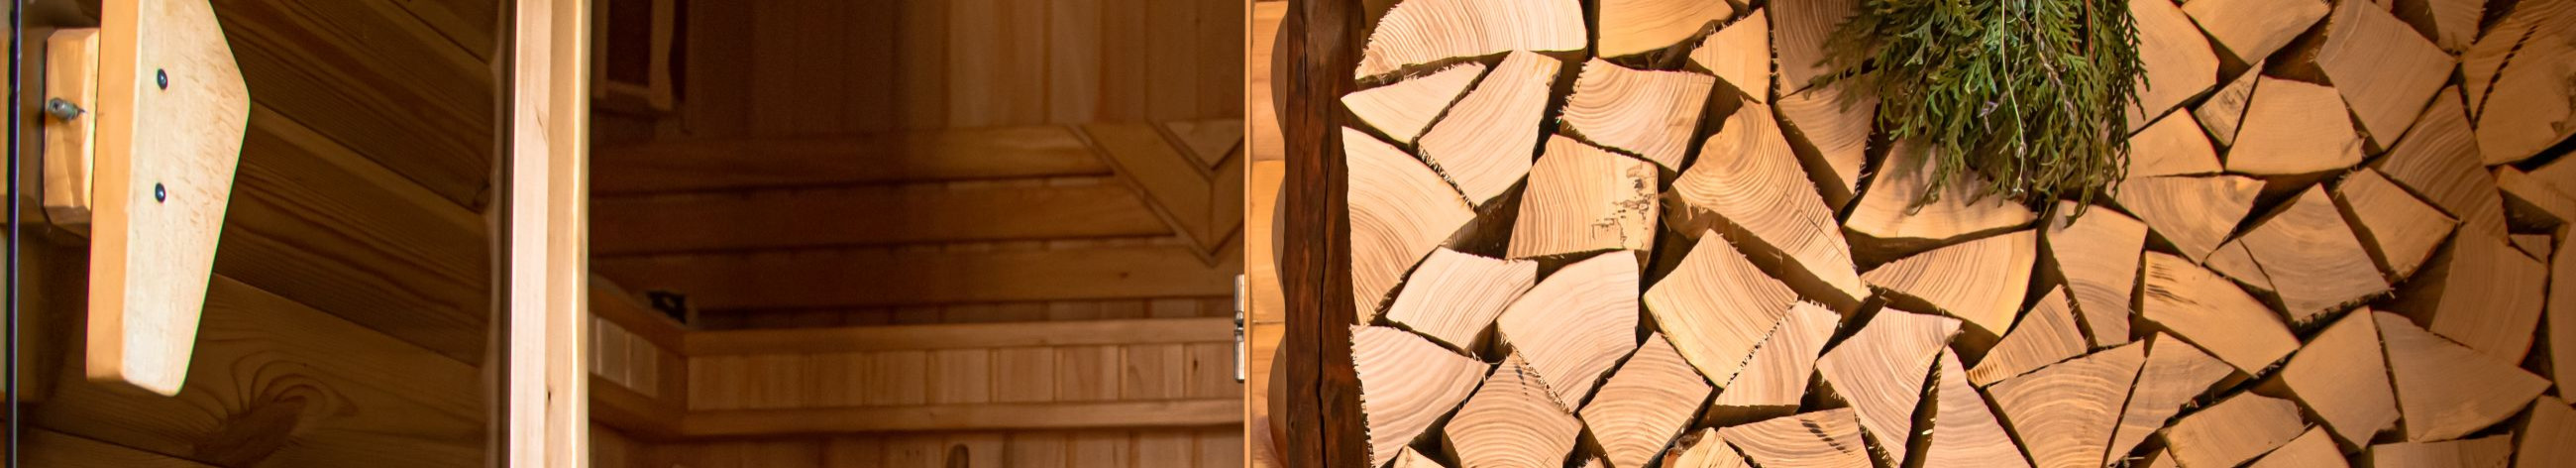 We craft bespoke saunas, erect wooden structures, and create durable solid wood furniture.